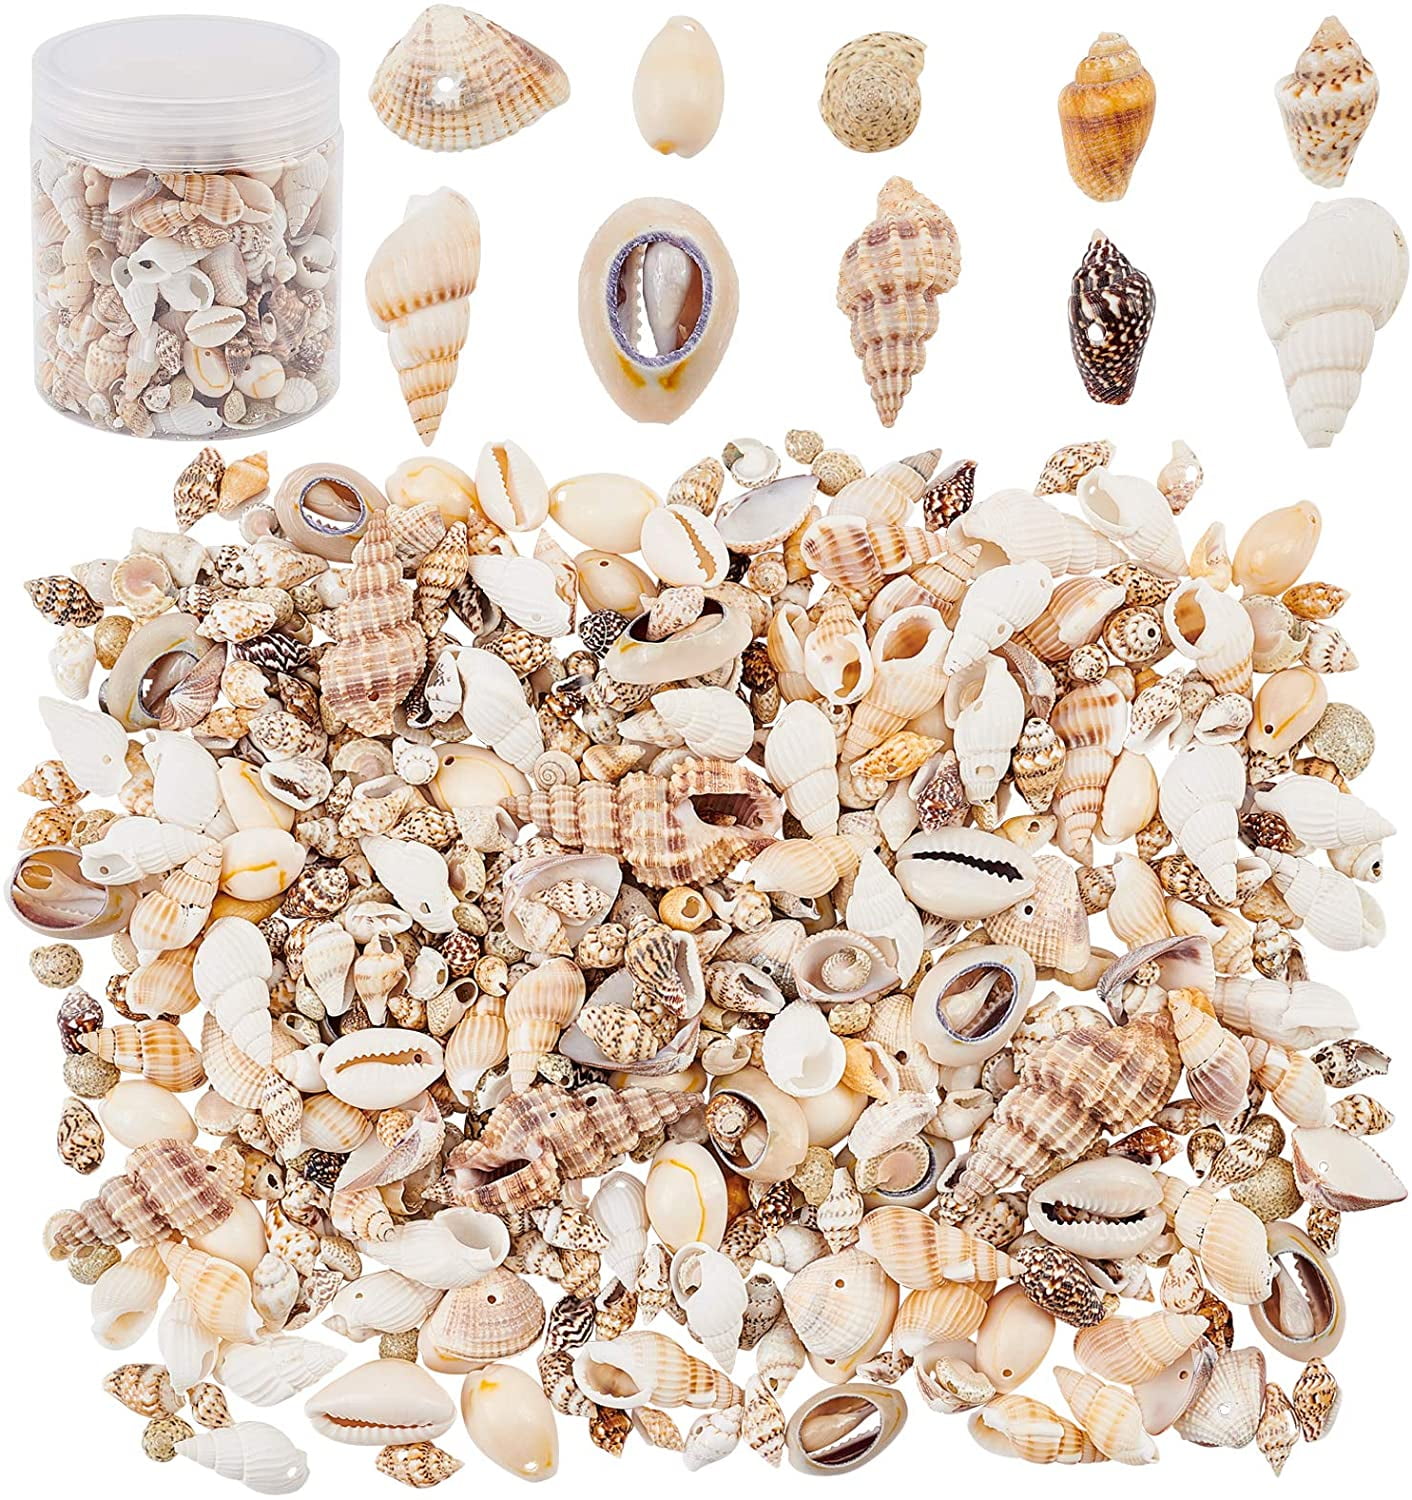 Natural Holey SHELL Pieces Seashells Beach Supplies Jewelry Making Craft